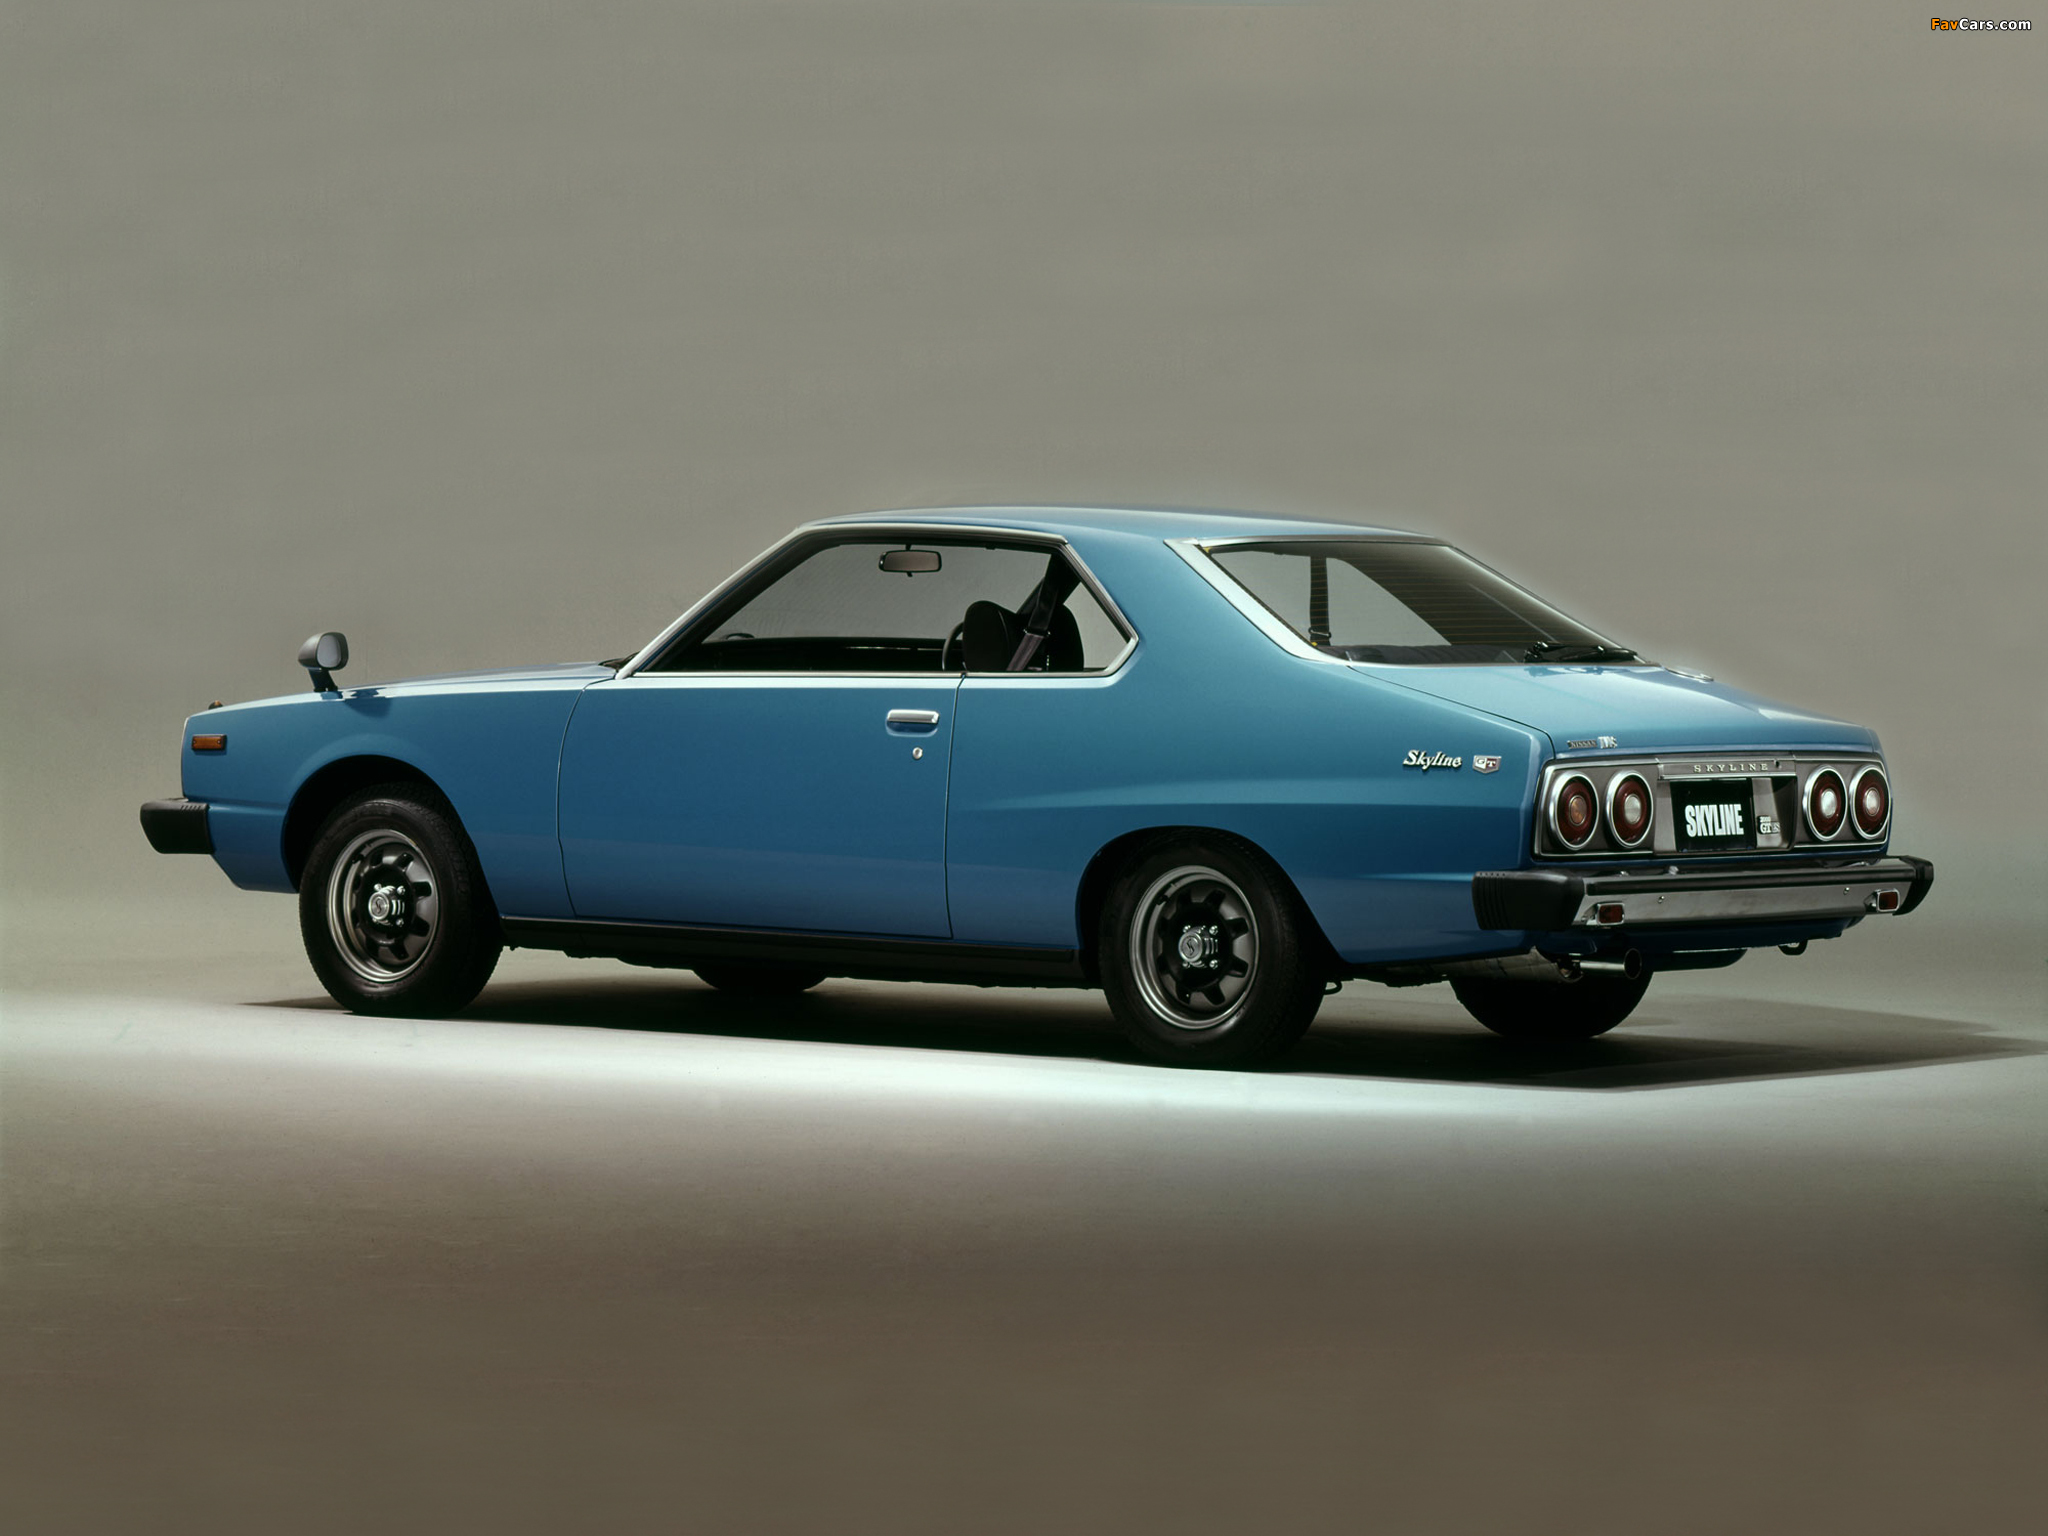 Nissan Skyline 2000GT Coupe (C210) 1977–79 pictures (2048 x 1536)